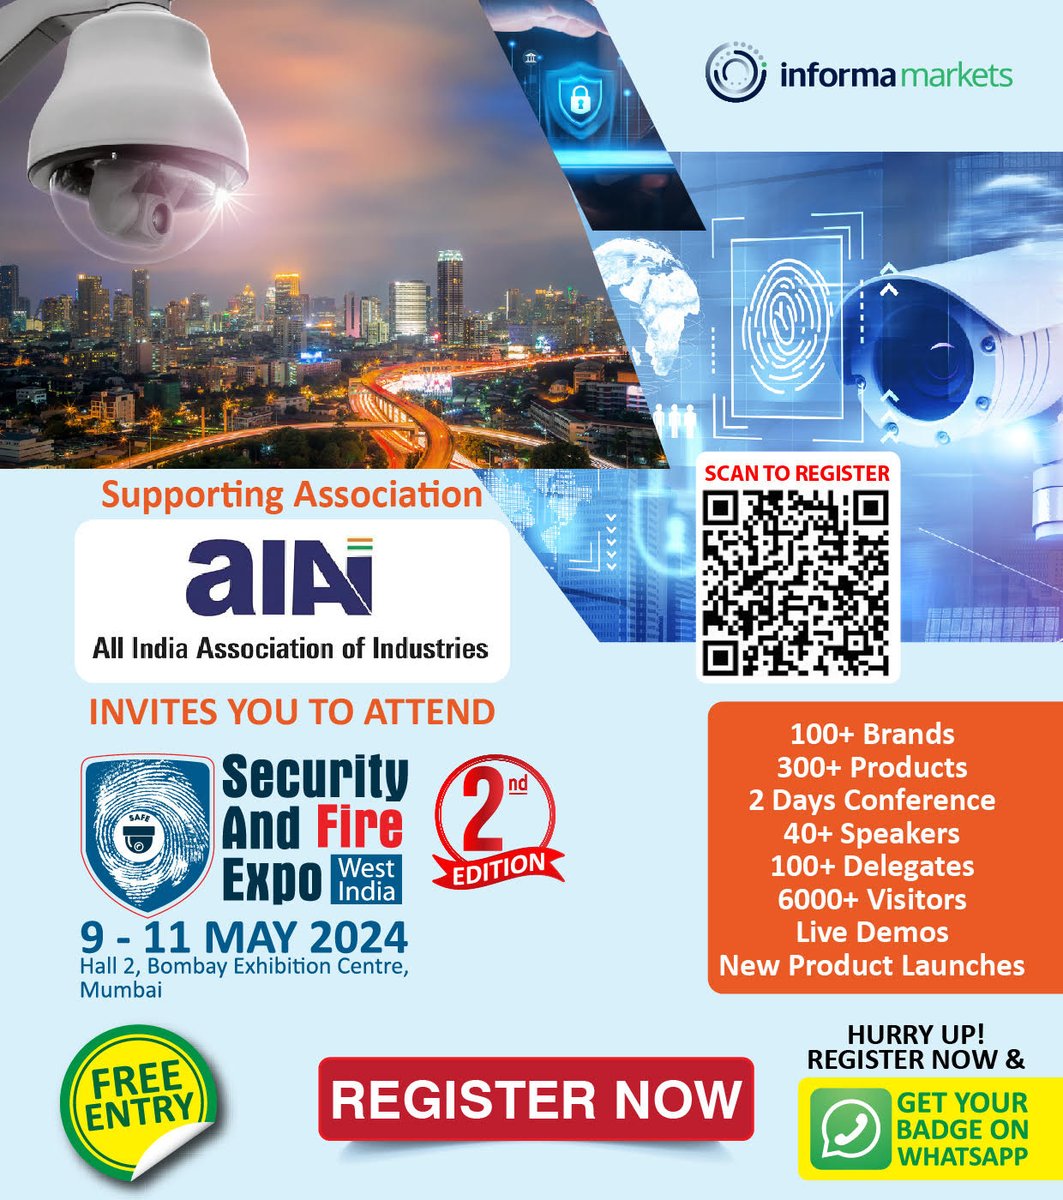 All India Association of Industries (AIAI) is supporting Security and Fire Expo (West India). The exhibition will be happening on 9-11 May 2024 at Hall 2, Bombay Exhibition Centre, Mumbai.
Registration Link:
…r-registration-west.safeindiaexpo.com/.../...
 #safewest2024 #securitymanagement